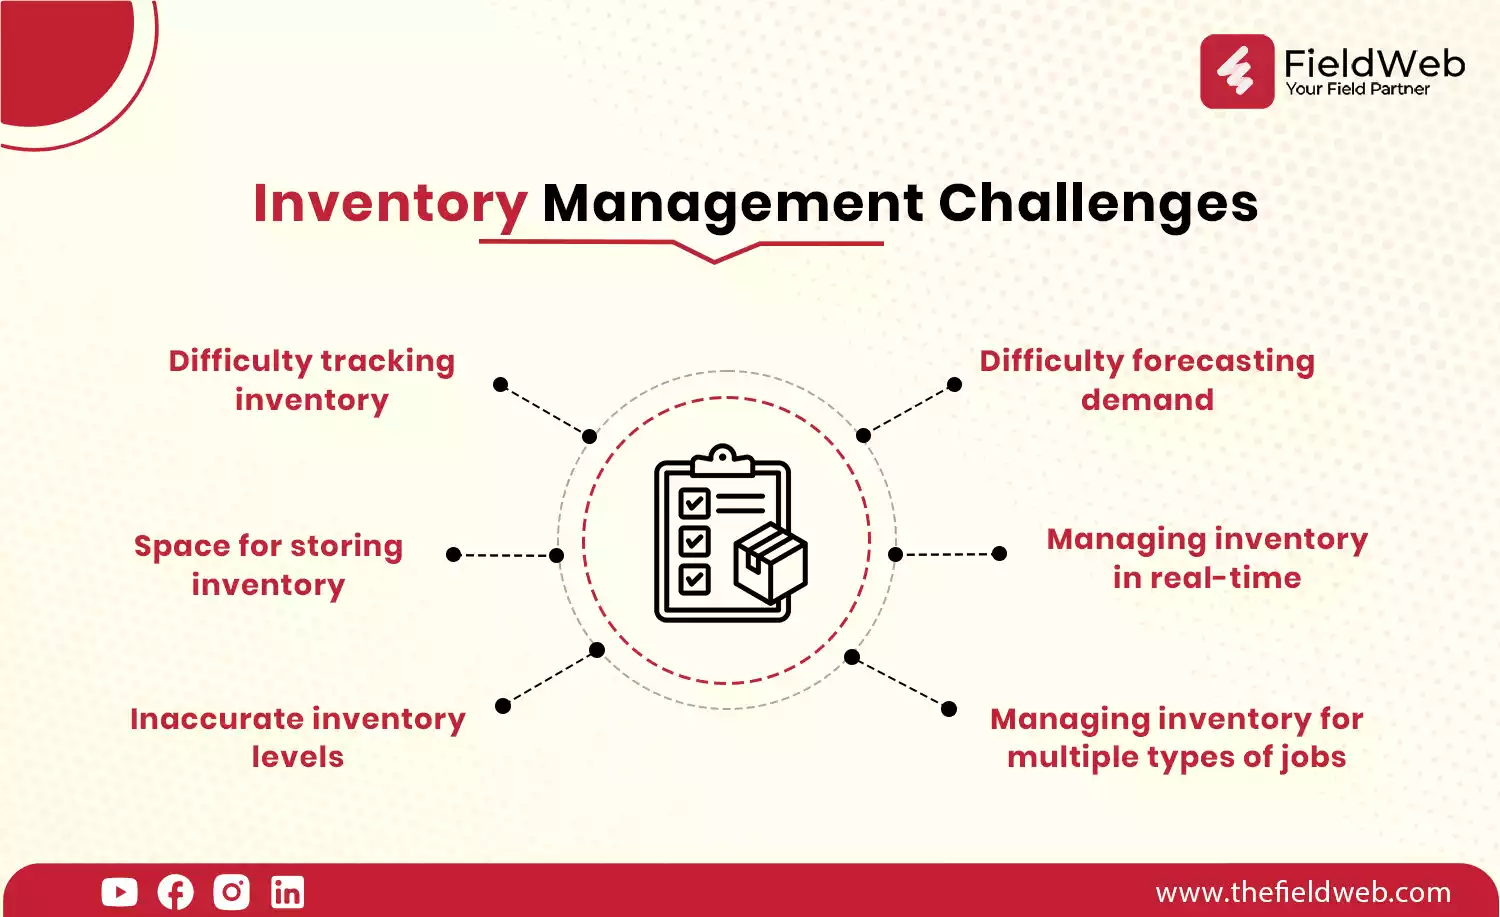 image is displaying 6 common inventory management challenges faced by field service businesses